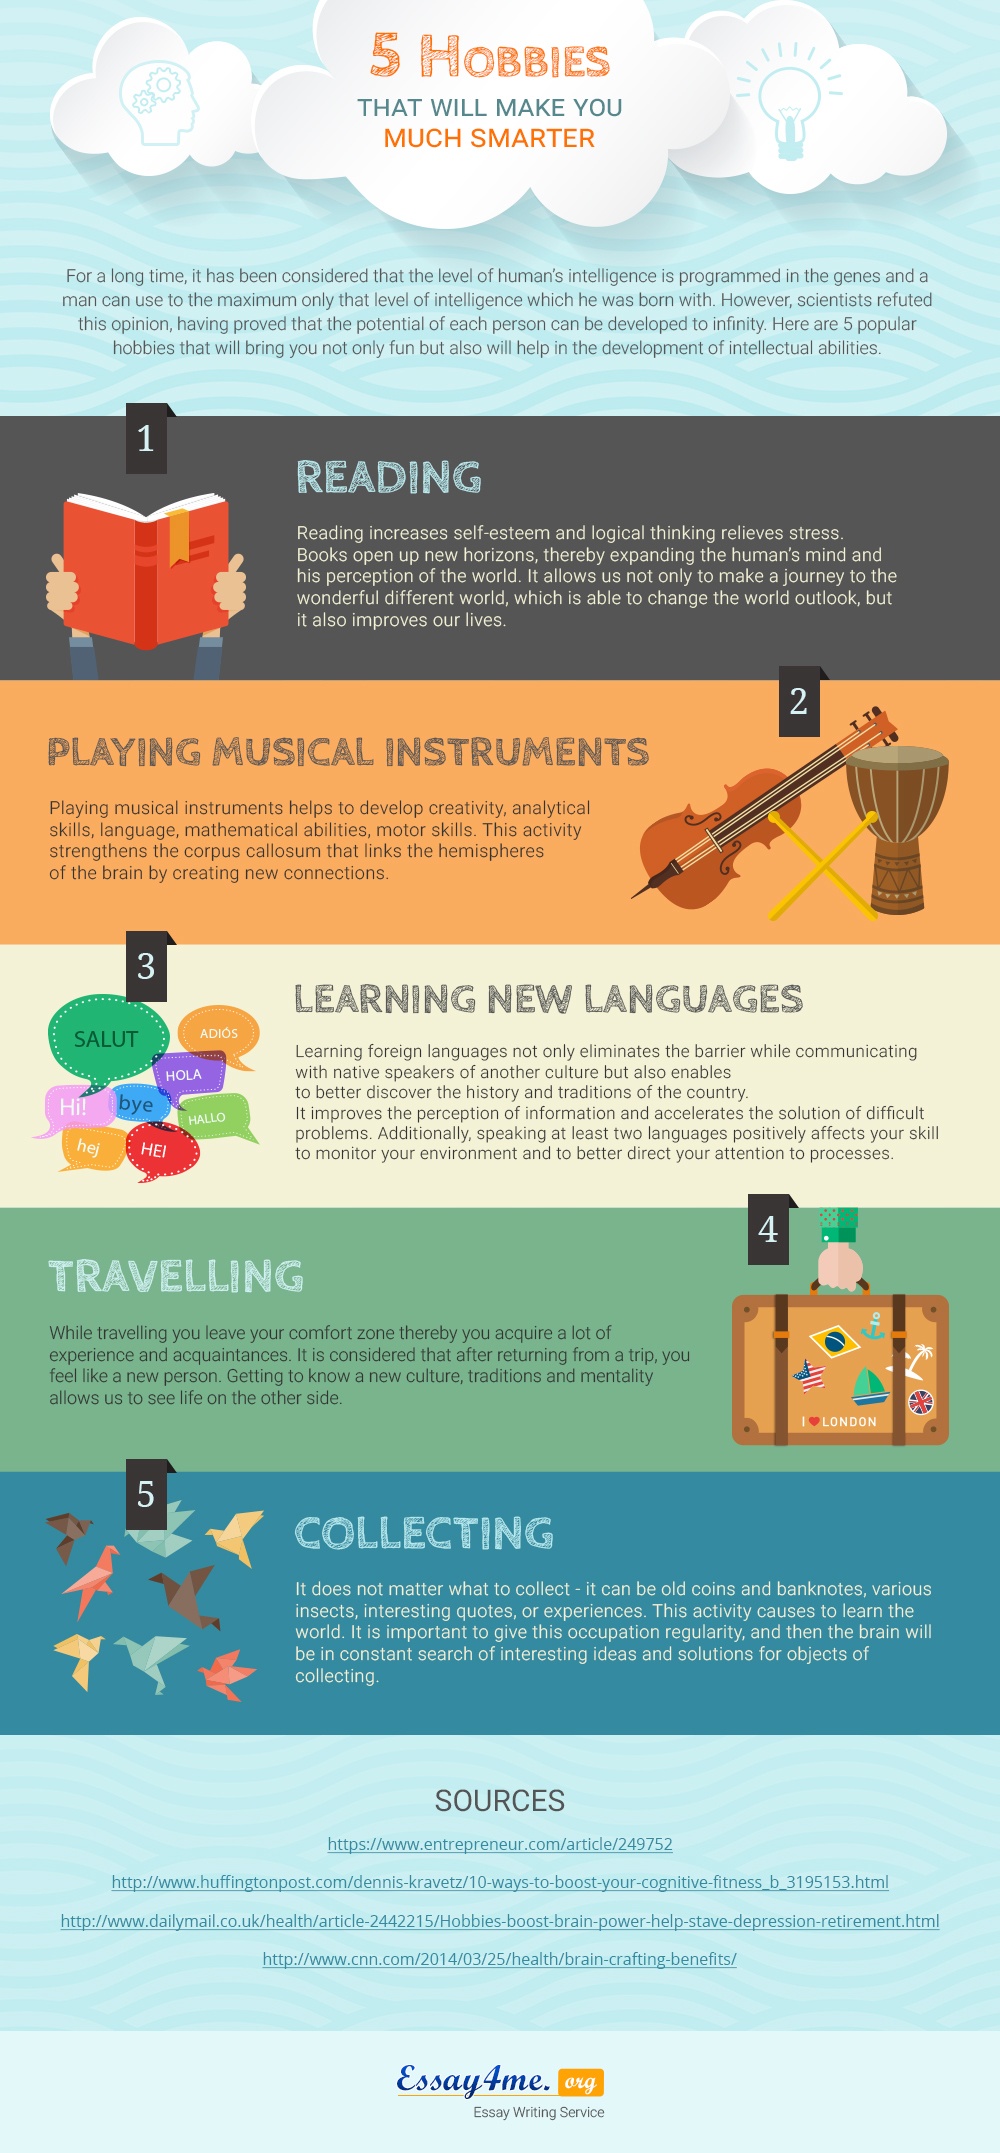 5 Hobbies That Will Make You Much Smarter Infographic